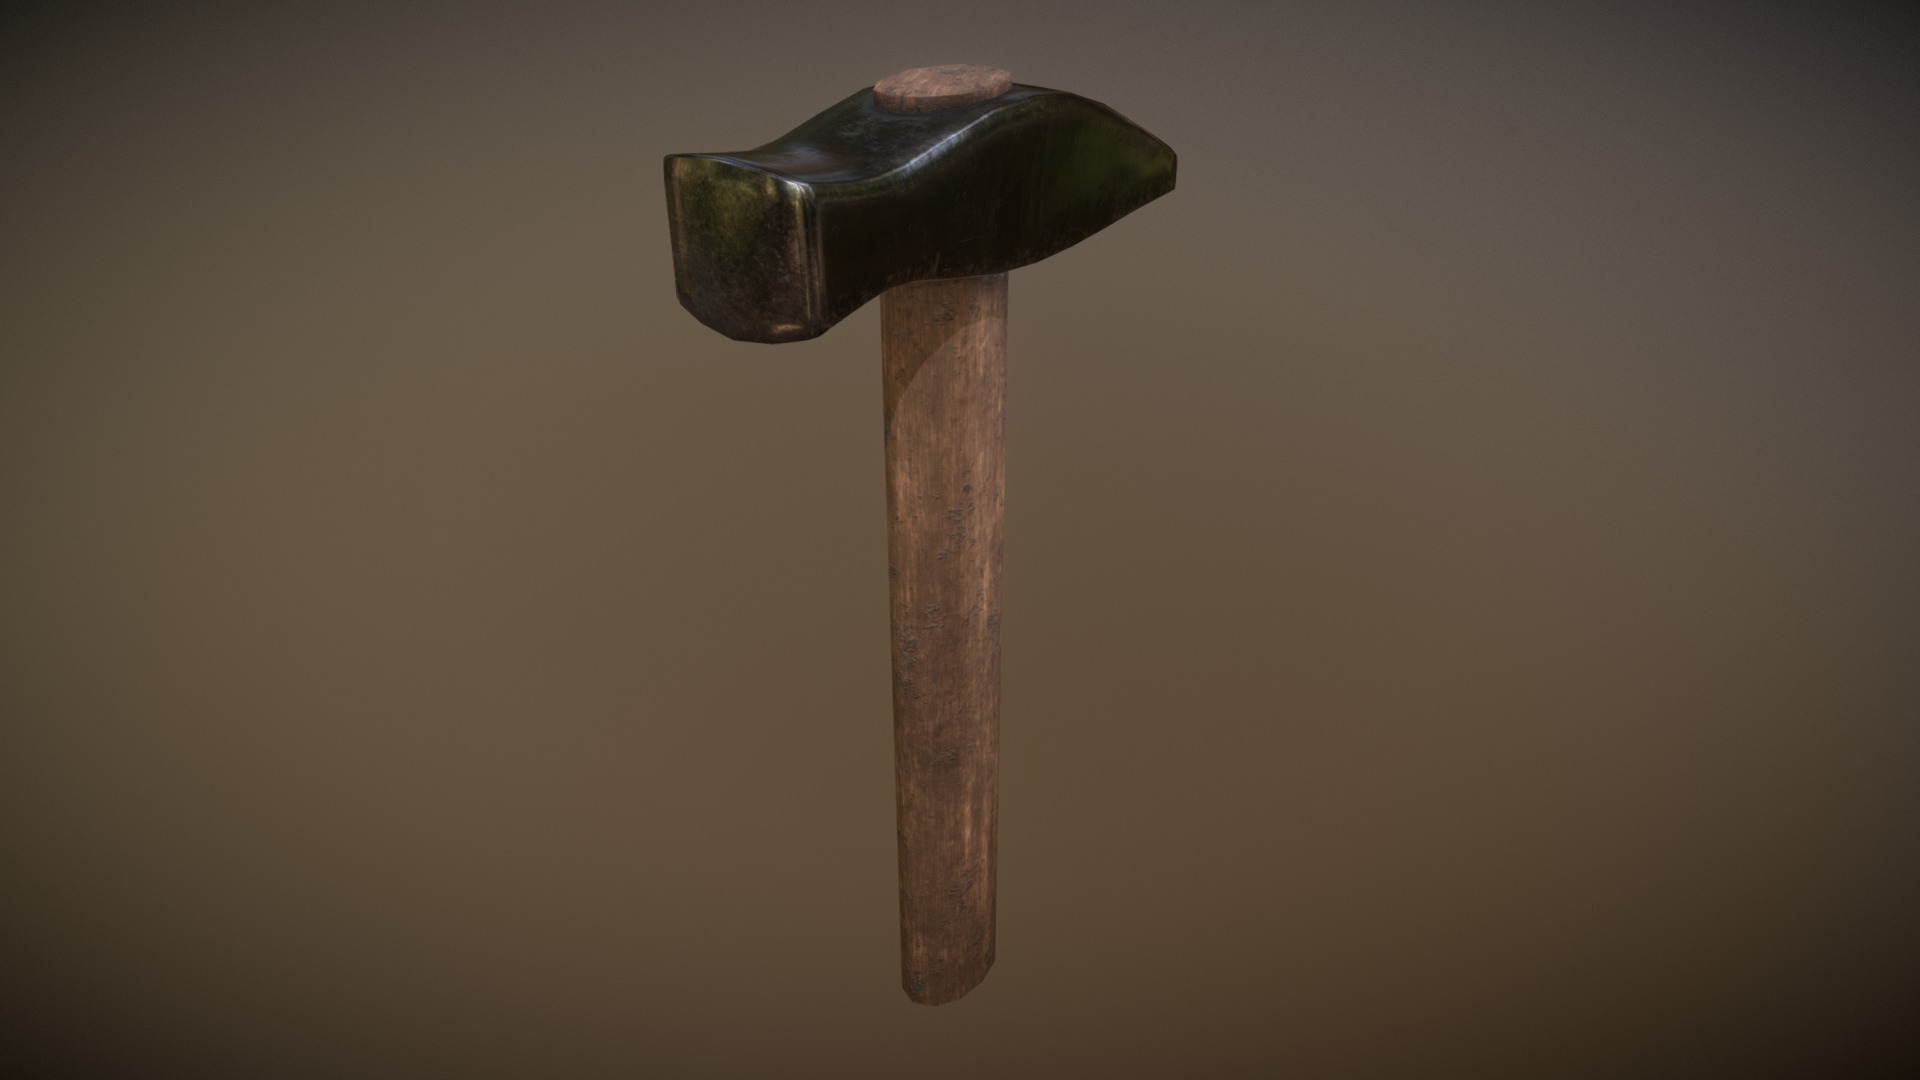 3D model Game Ready Blacksmith Hammer Low Poly - This is a 3D model of the Game Ready Blacksmith Hammer Low Poly. The 3D model is about a wooden hammer with a black handle.